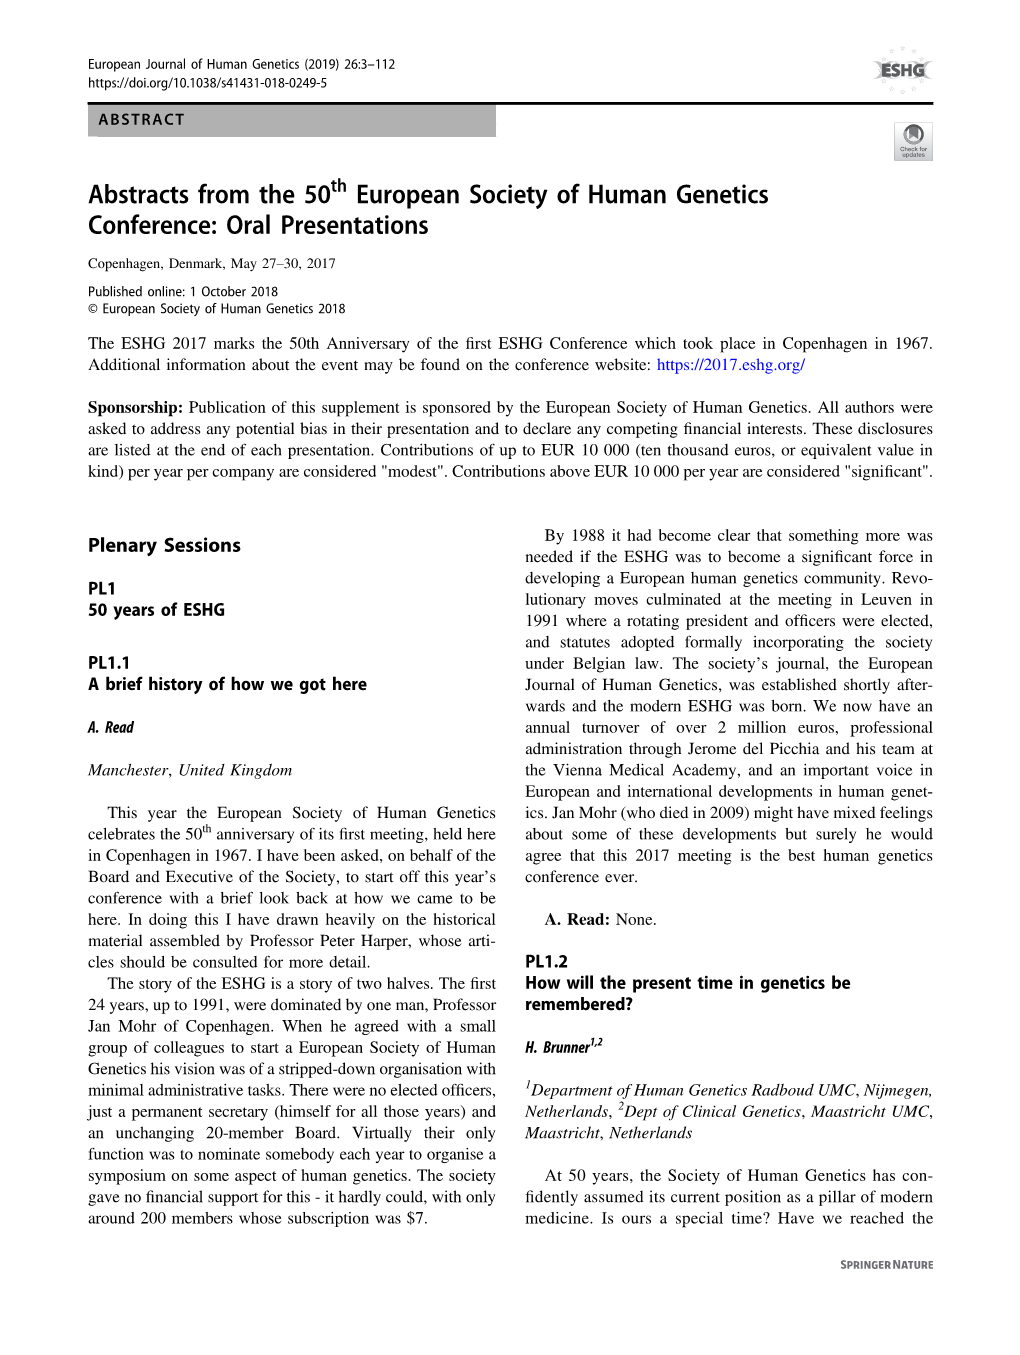 Abstracts from the 50Th European Society of Human Genetics Conference: Oral Presentations